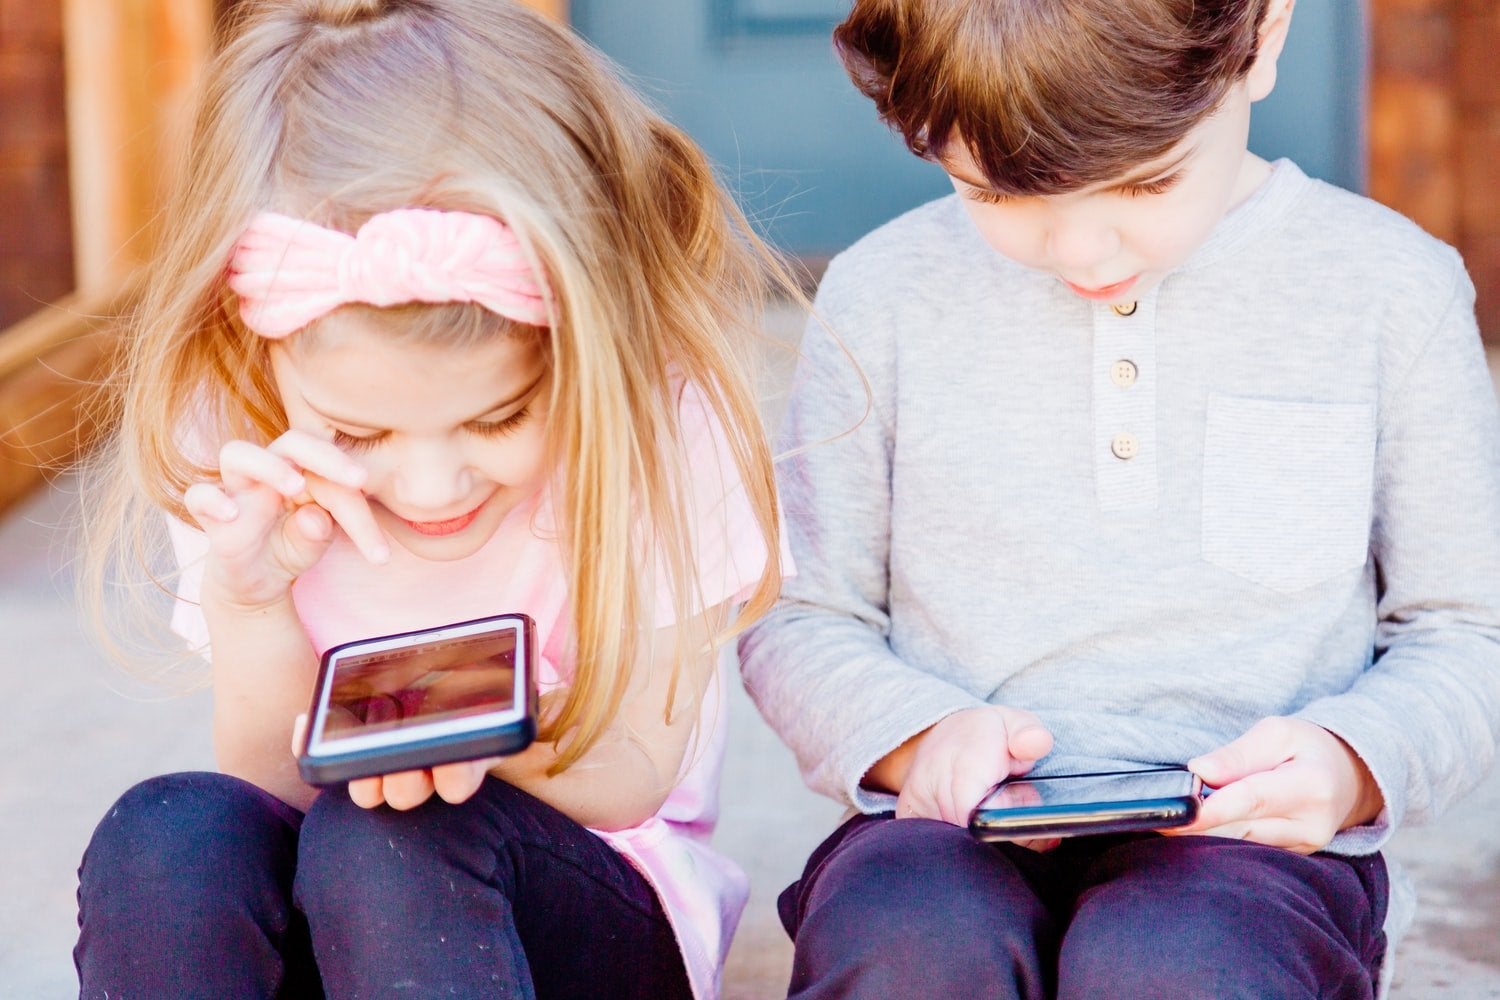 Two children sitting on the steps looking at their phones